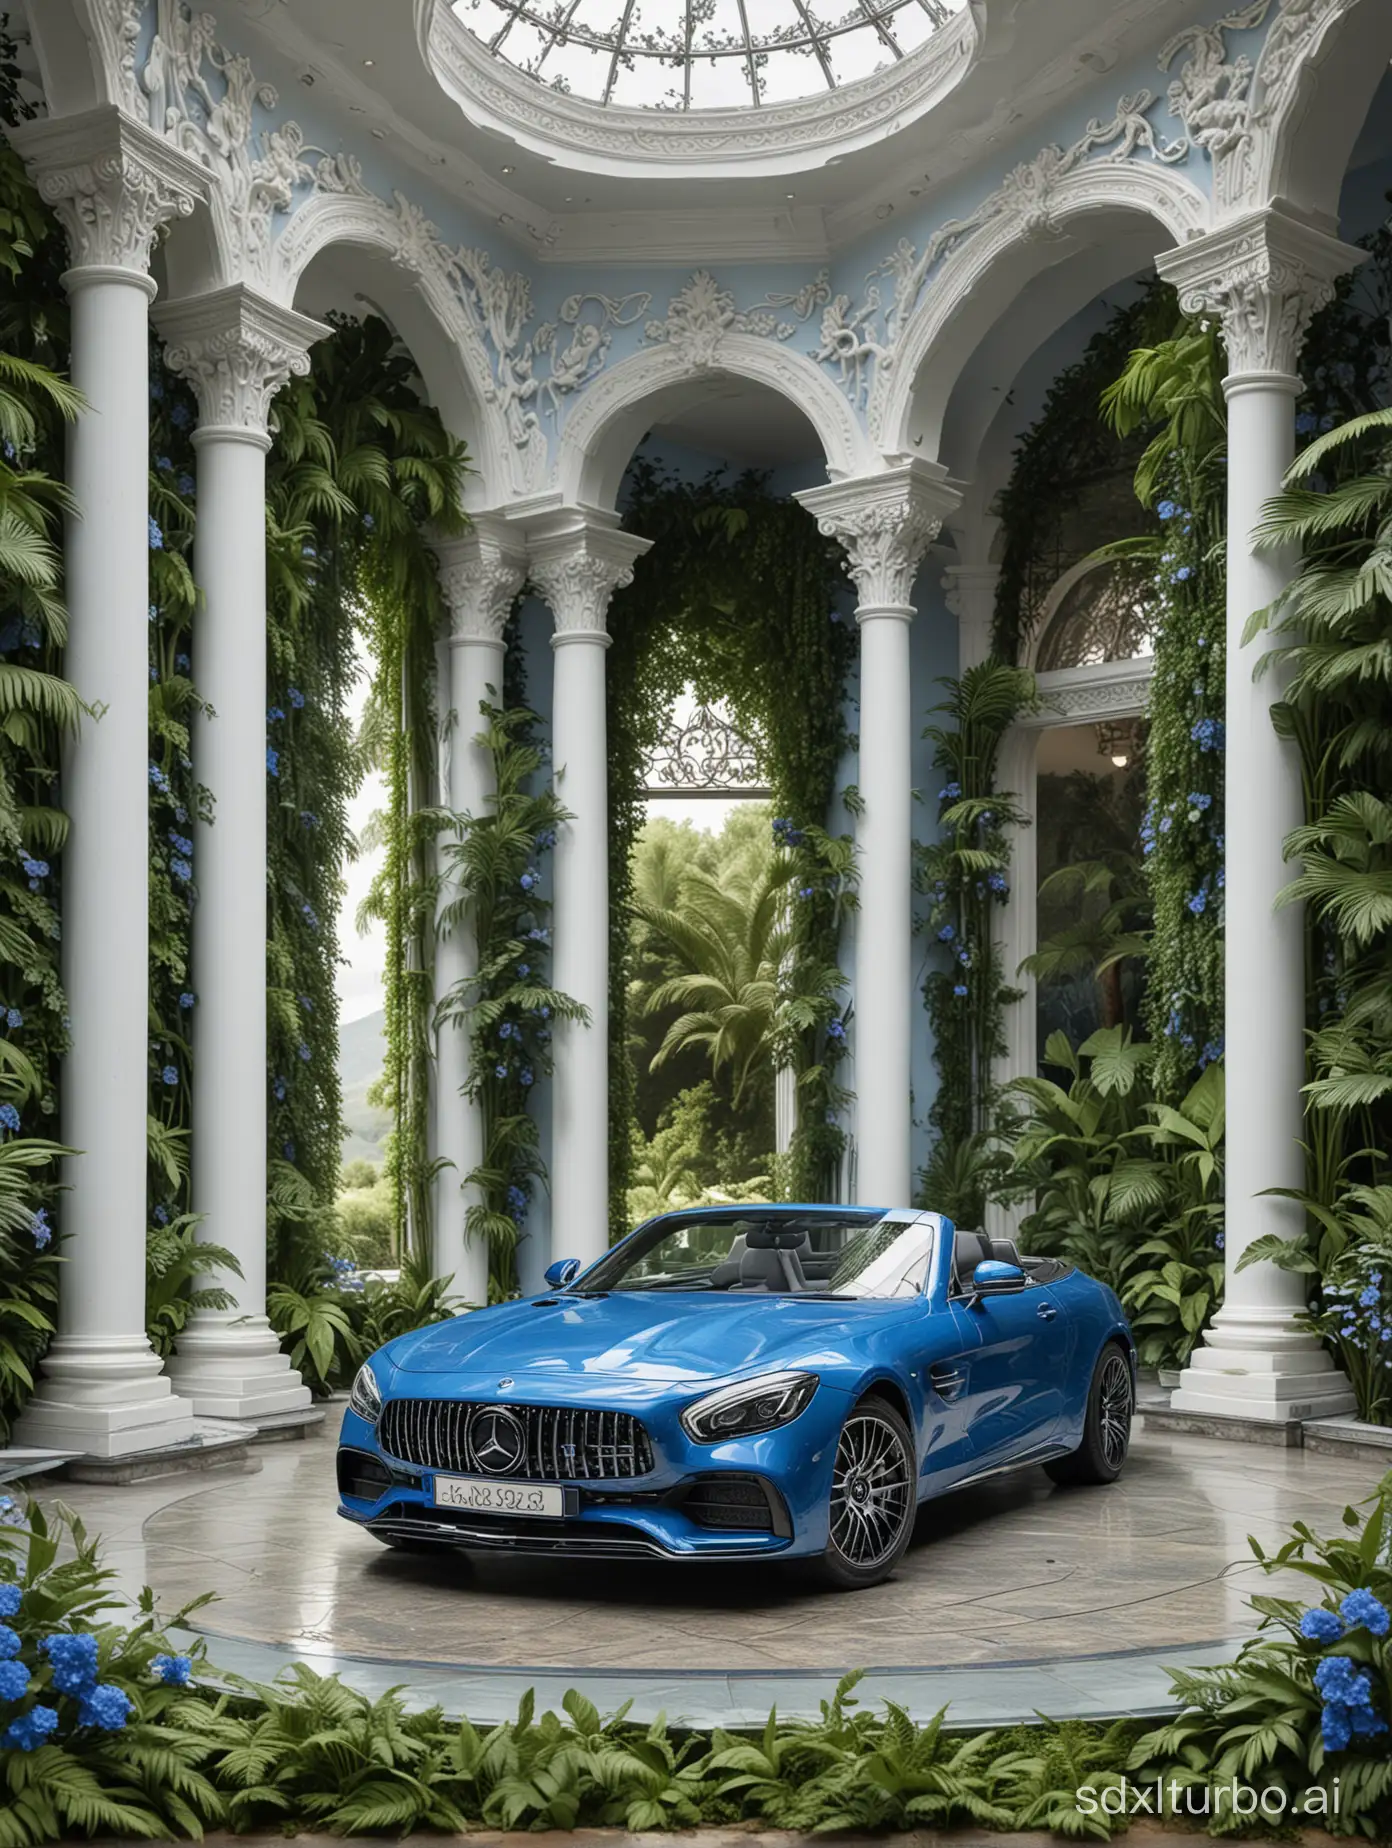 Luxurious-Blue-Mercedes-Car-in-Extravagant-Showroom-Surrounded-by-Lush-Greenery